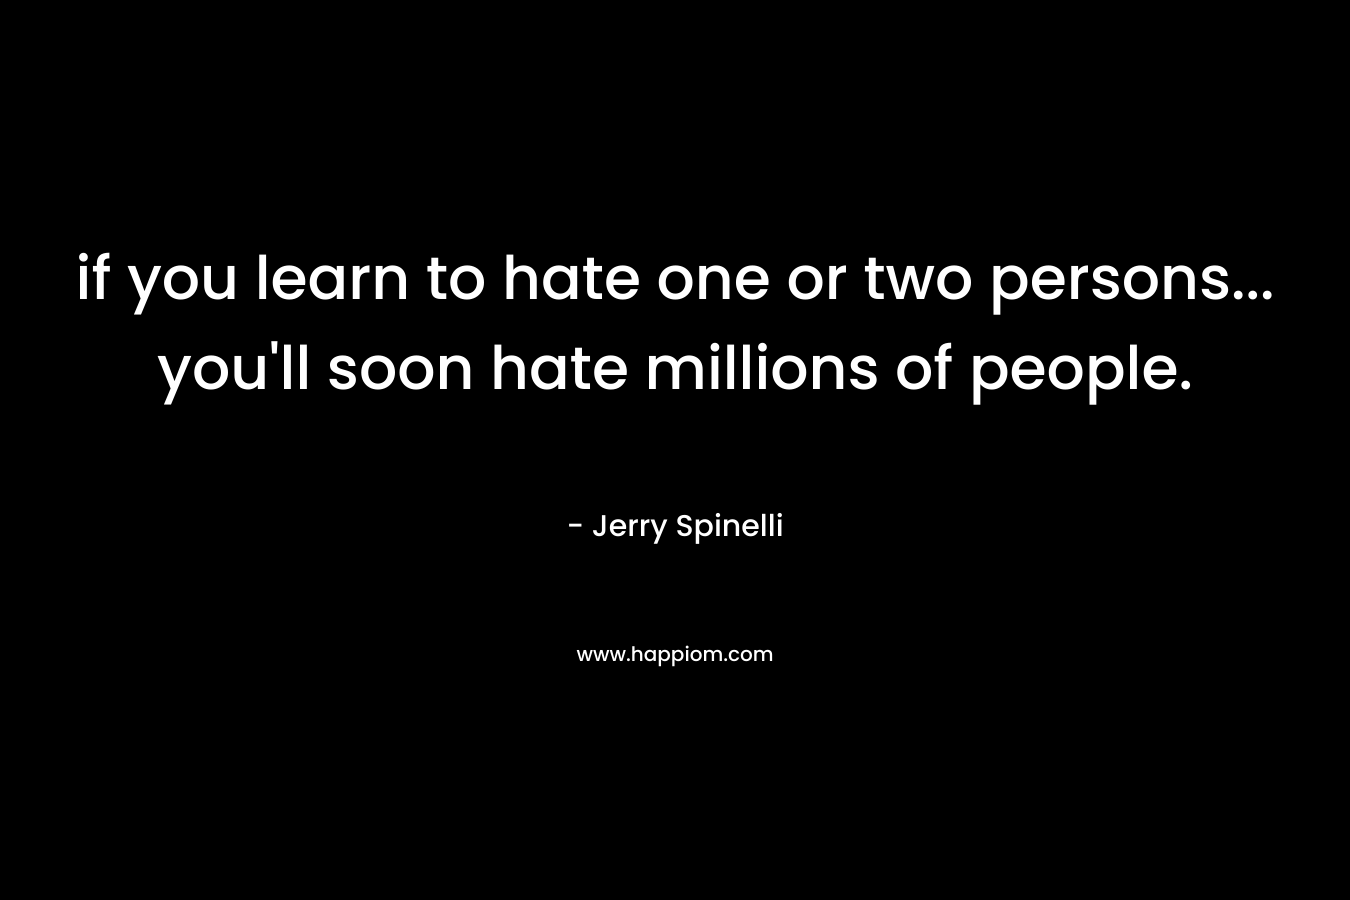 if you learn to hate one or two persons... you'll soon hate millions of people.